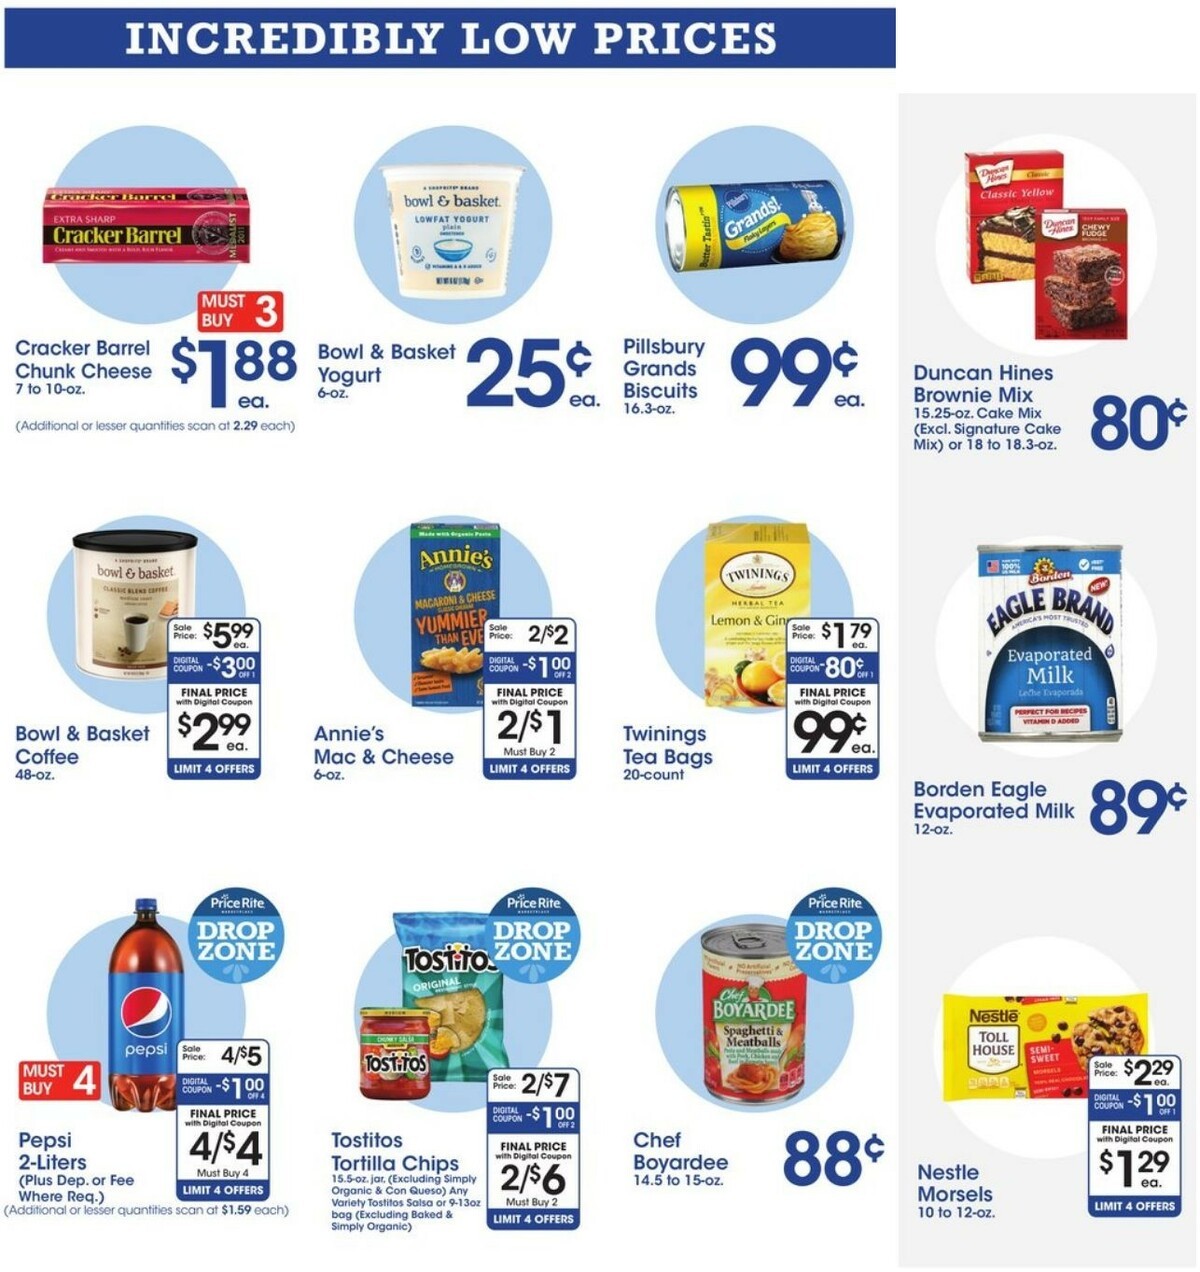 Price Rite Weekly Ad from December 3